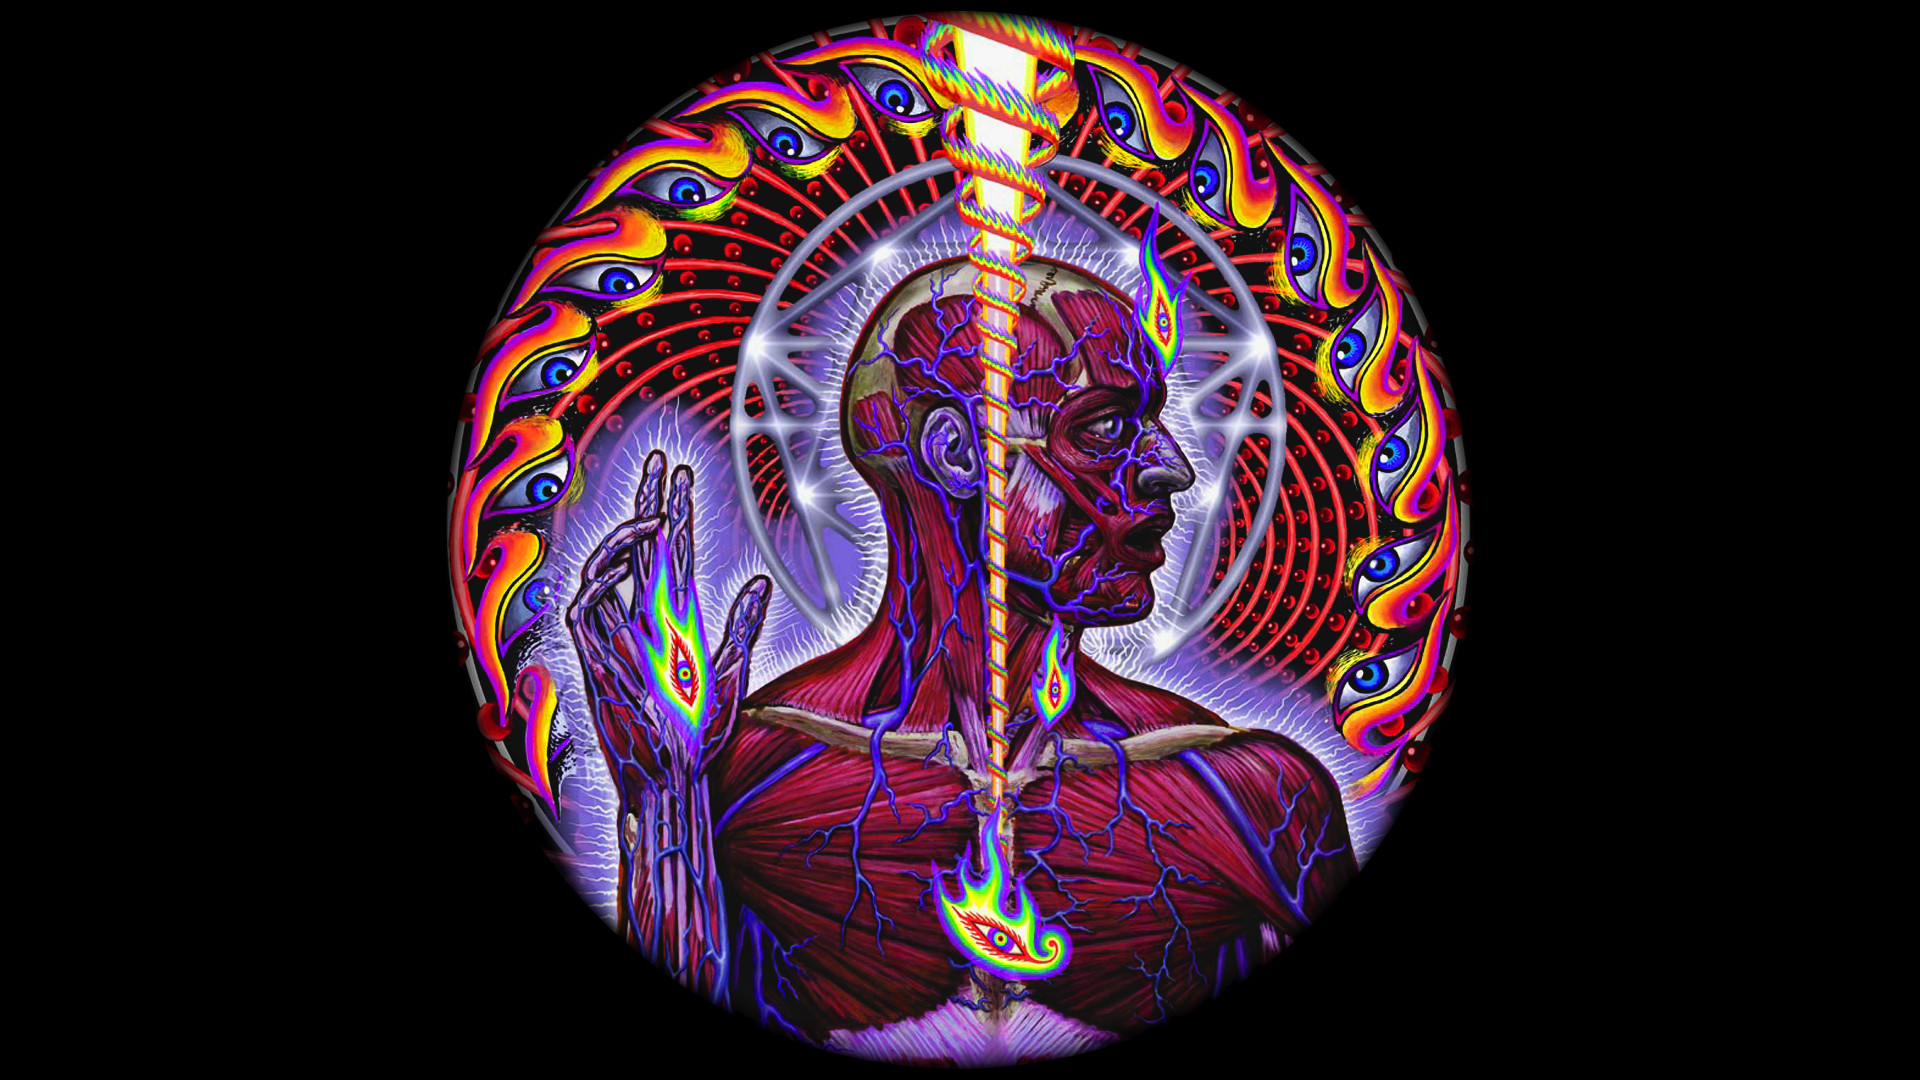 Tool Lateralus Trying To Revive This Sub